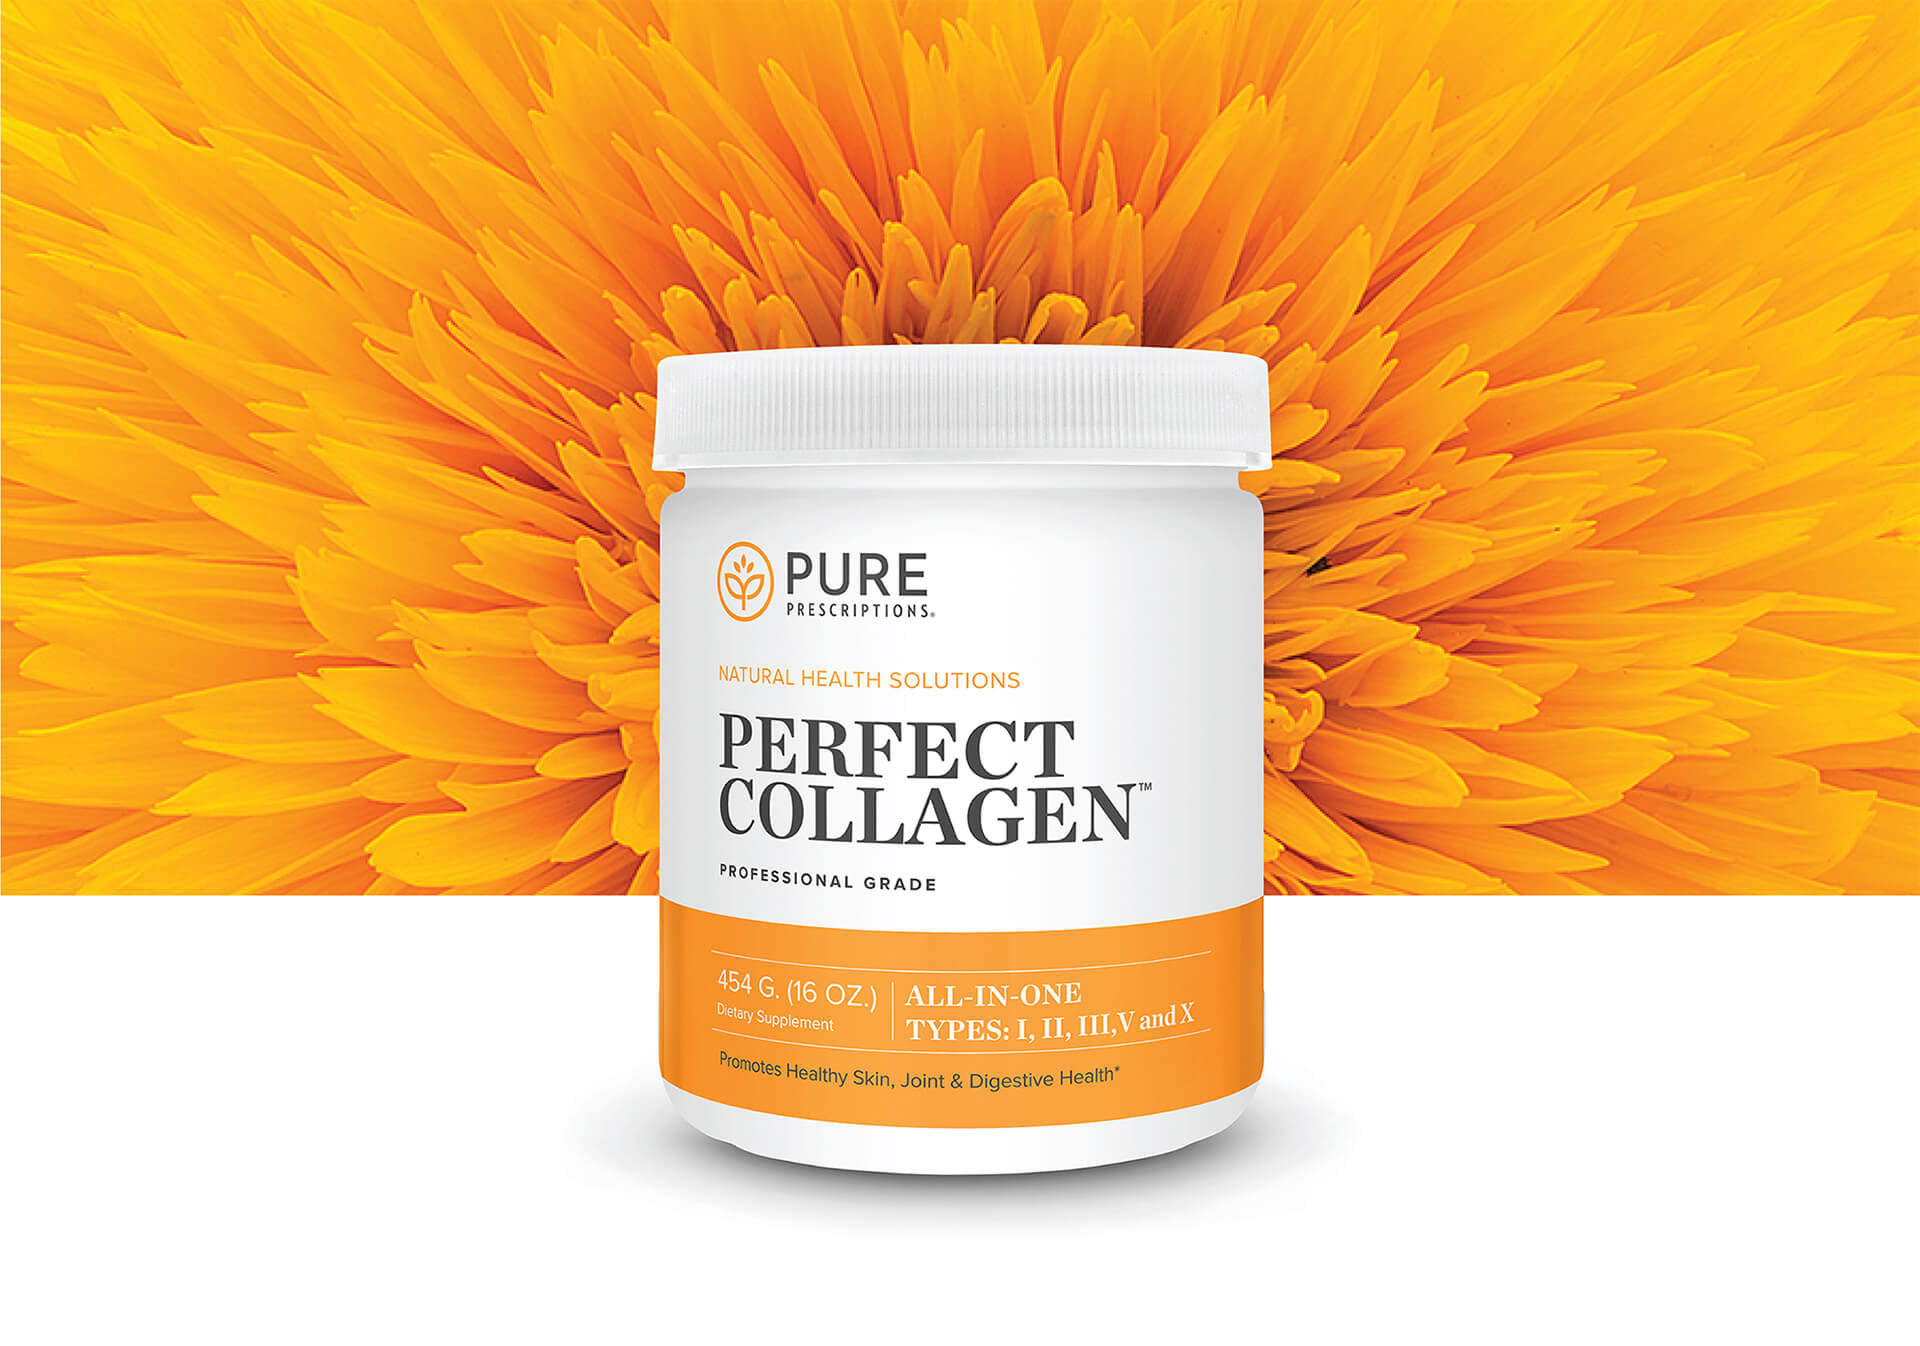 Is Collagen Hype or Does It Work? Part 1